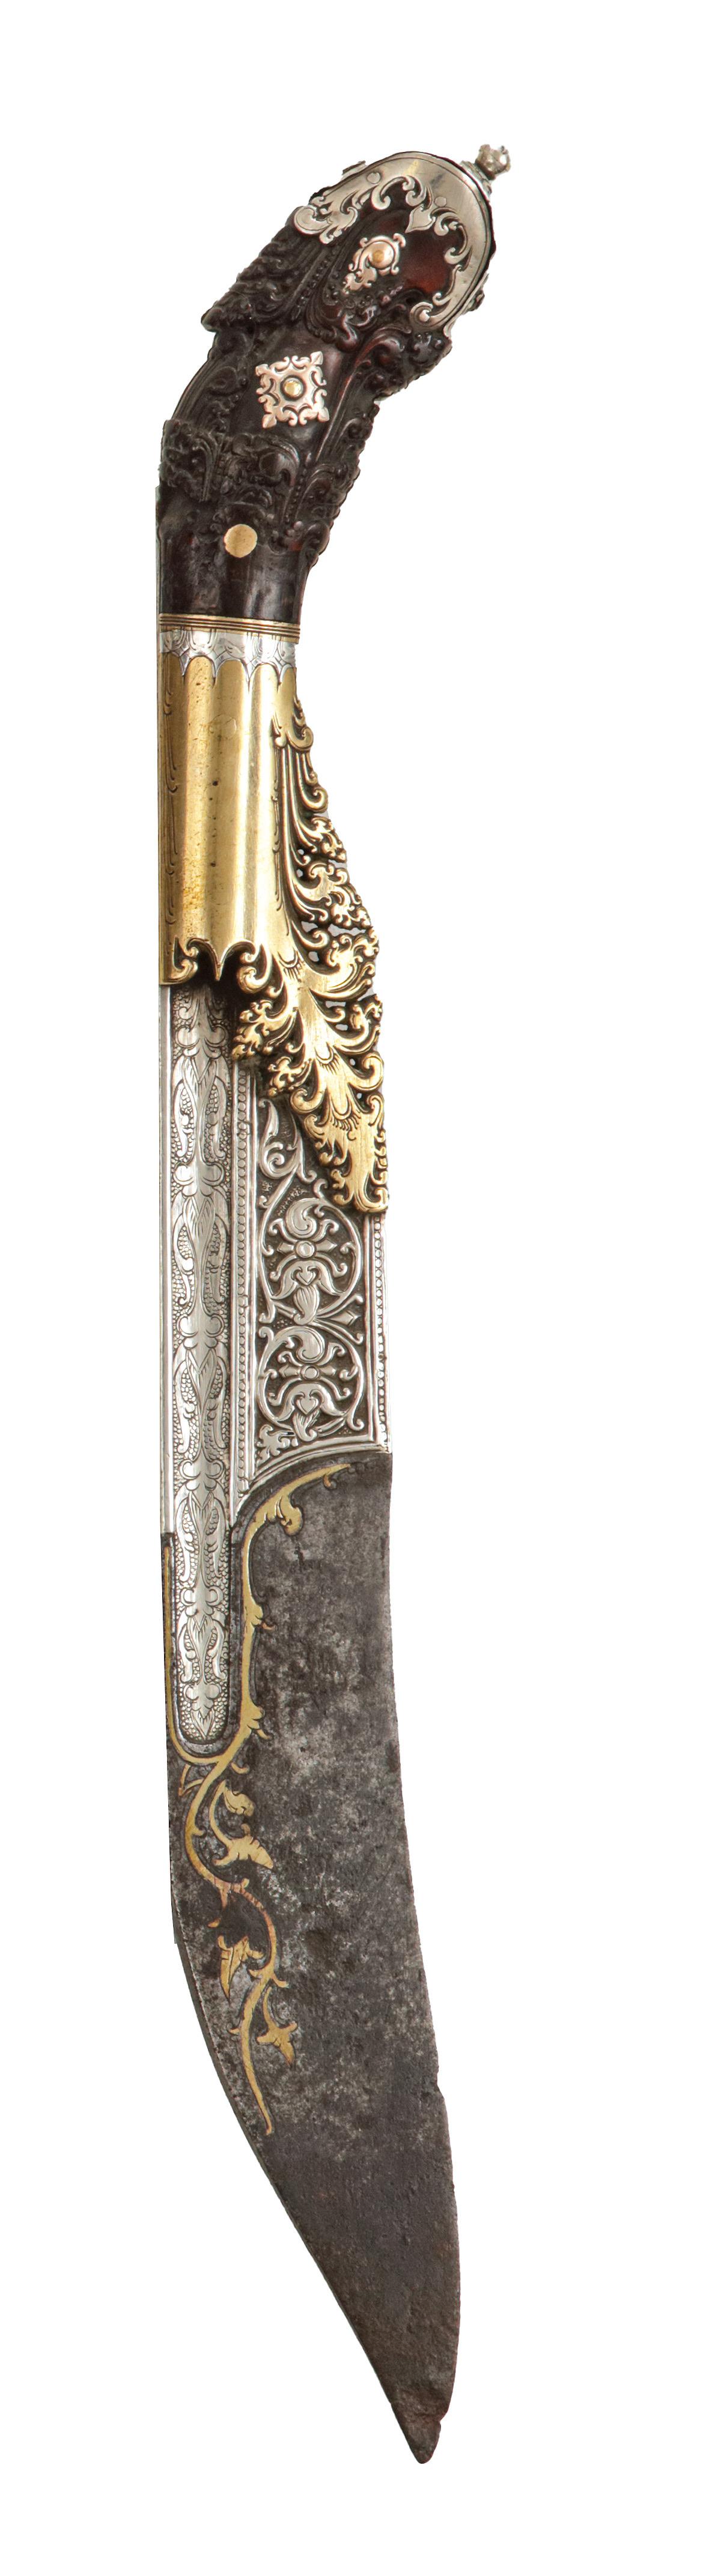 A silver and gold Sinhalese piha-kaetta dagger

Sri Lanka (Ceylon), Kingdom of Kandy, mid-18th century

L. 27 cm
 
The kasthāné is the national sword of Sri Lanka. It seems to have emerged in the 16th century following the first contact with